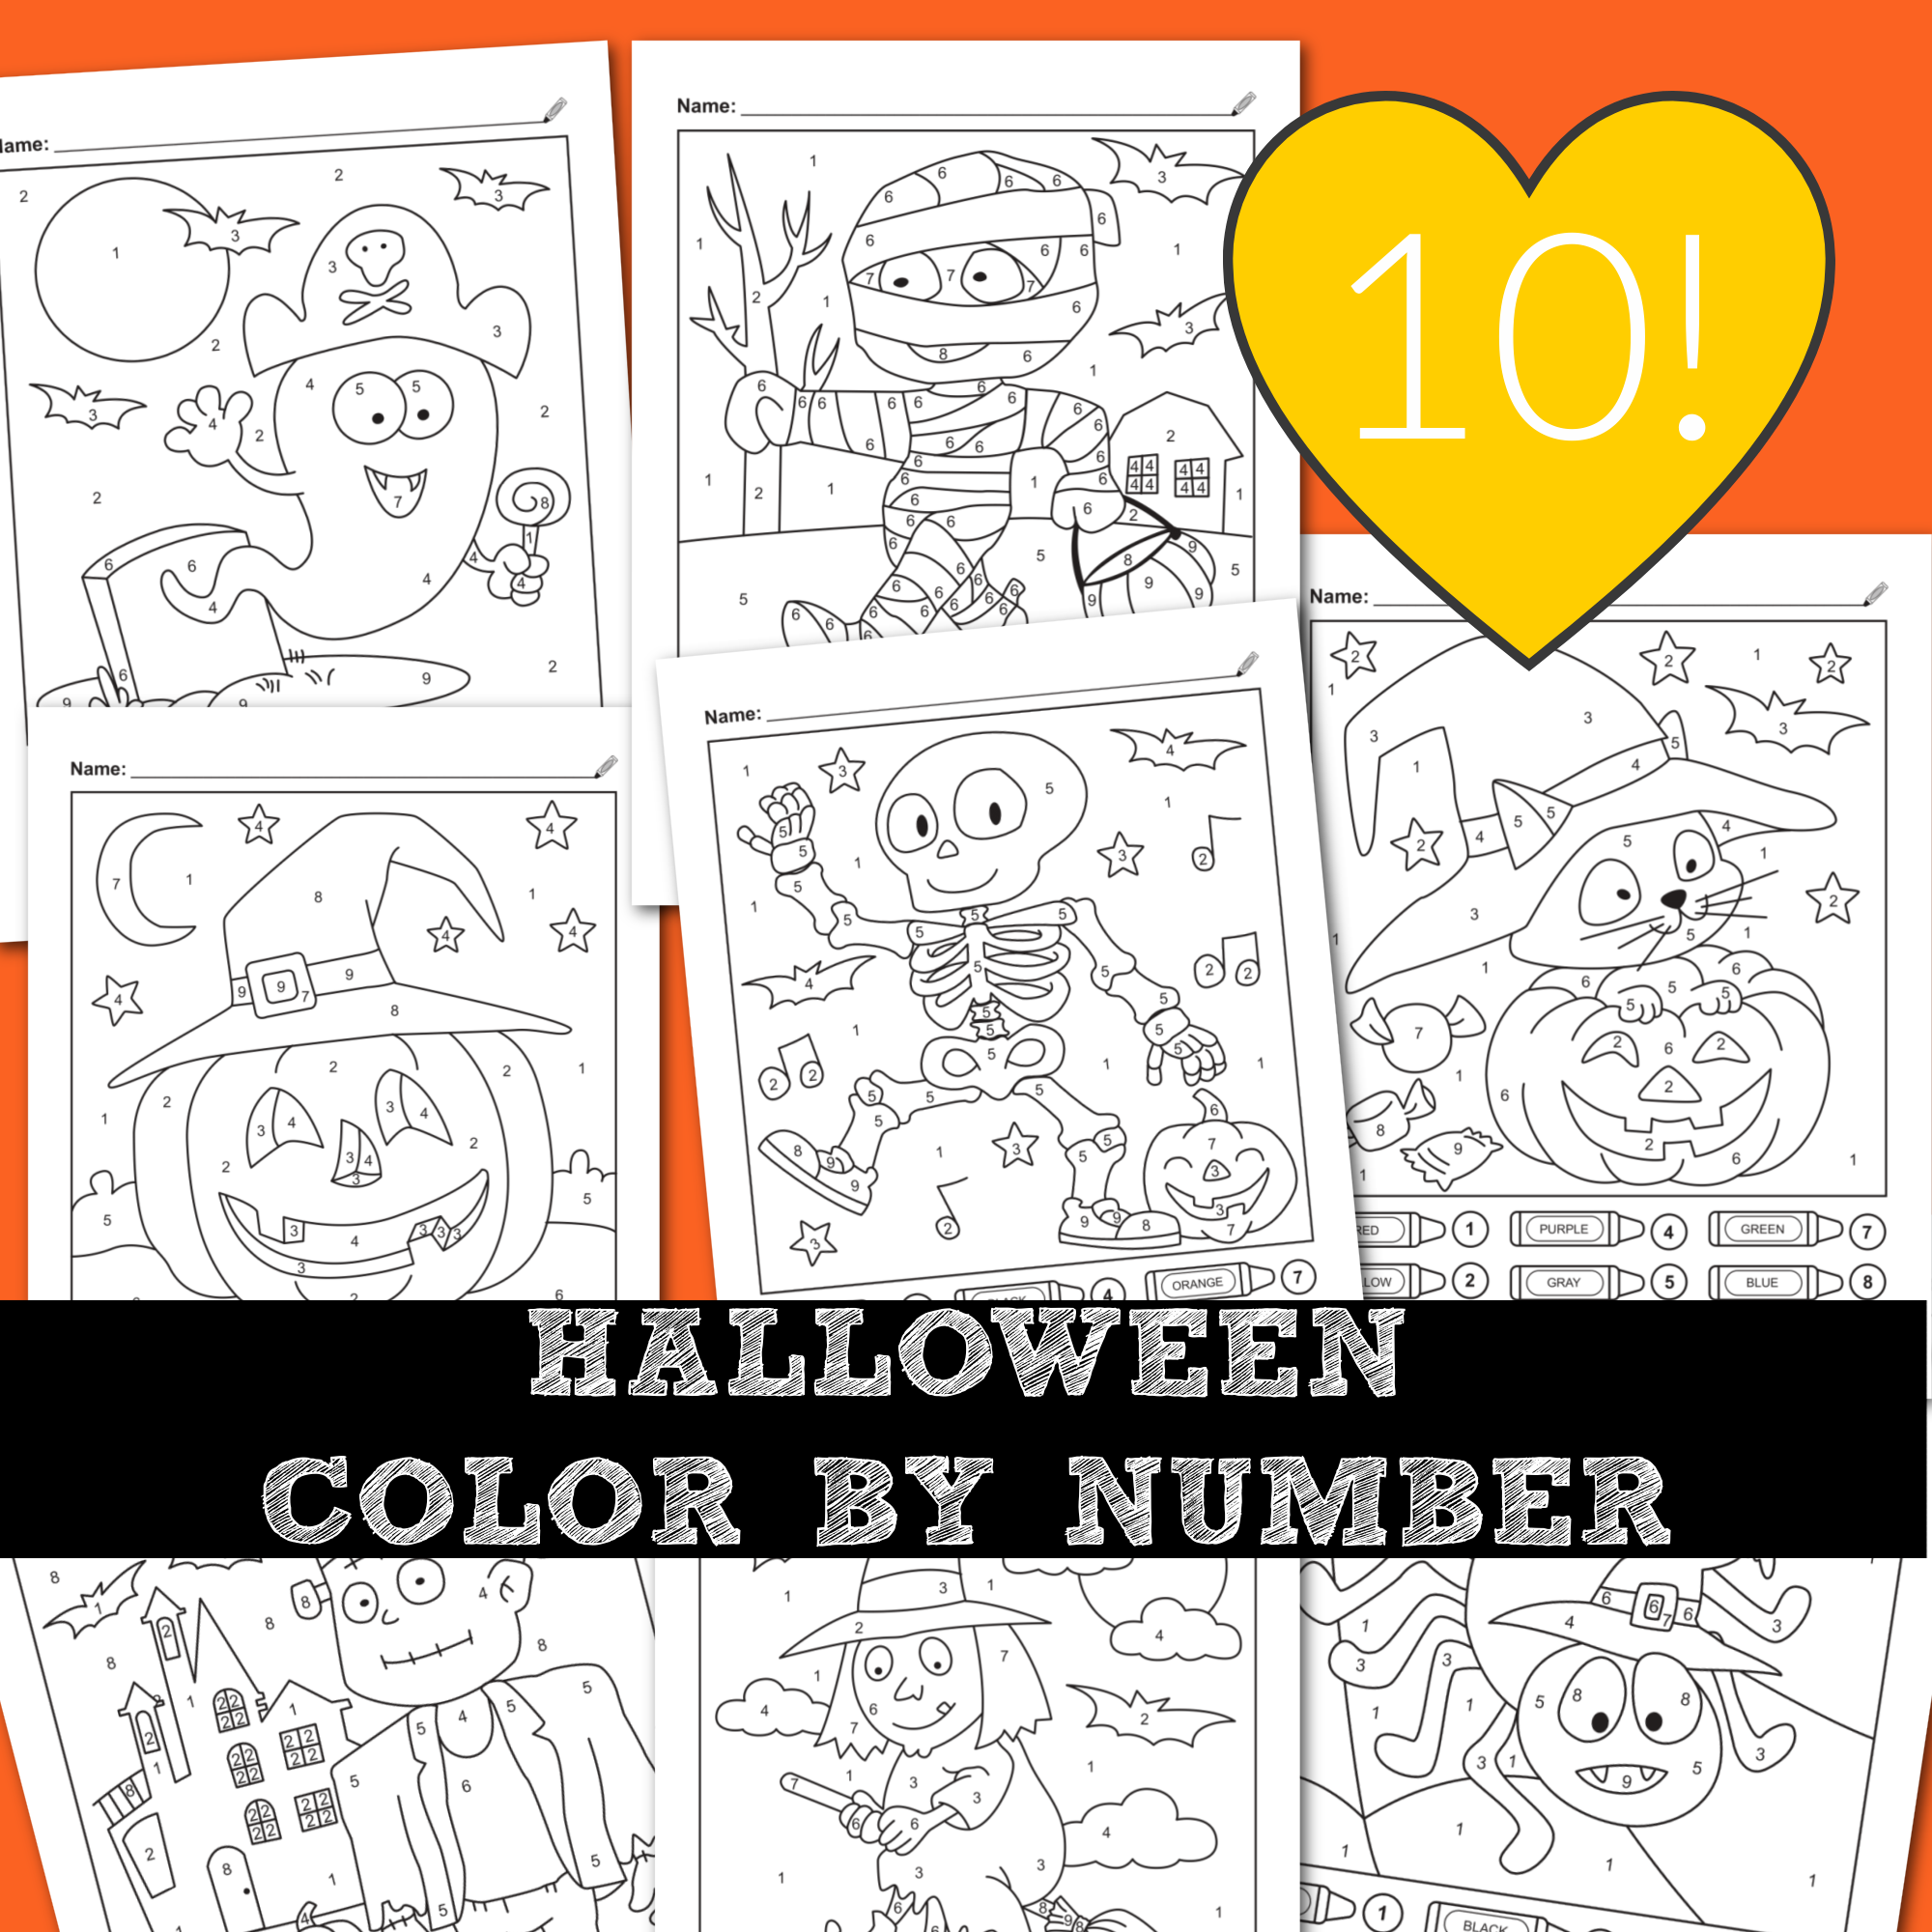 Halloween color by number printable worksheets â ispyfabulous